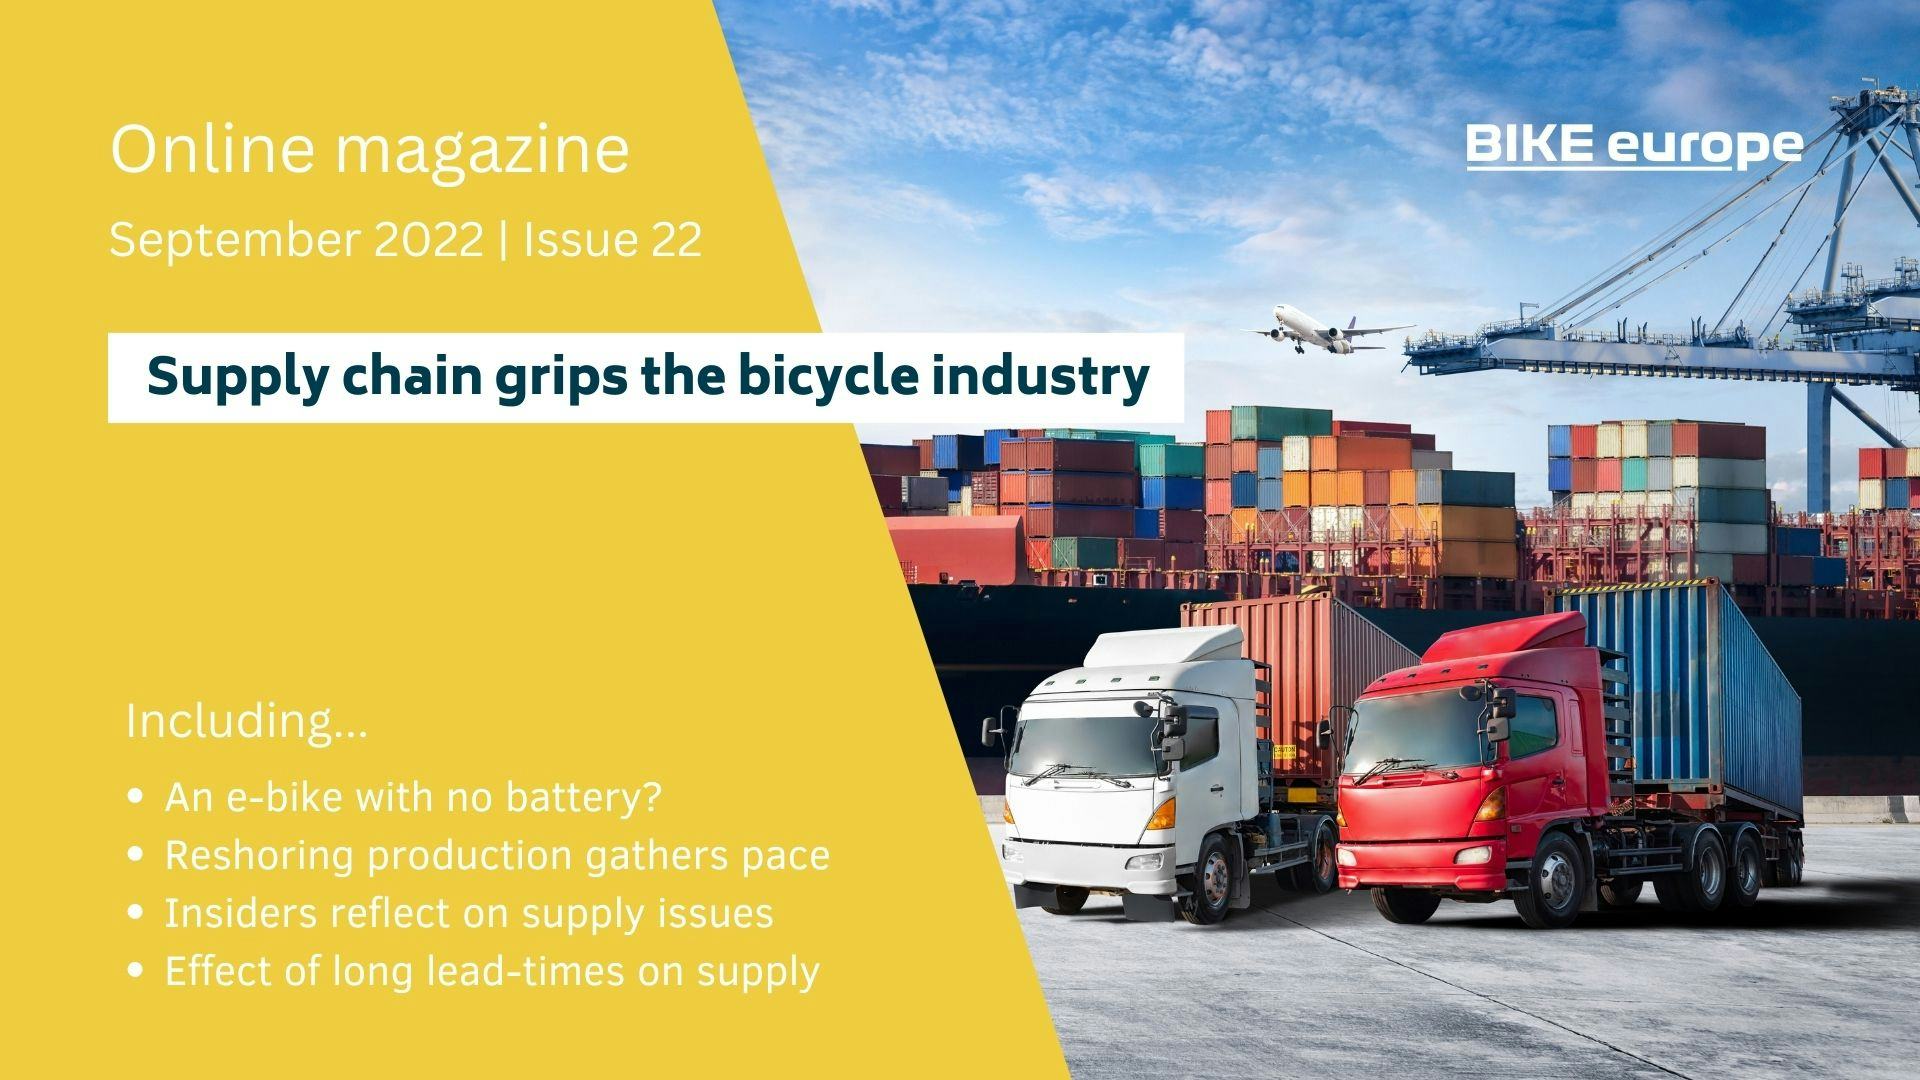 Online Magazine: Supply chain grips the bicycle industry